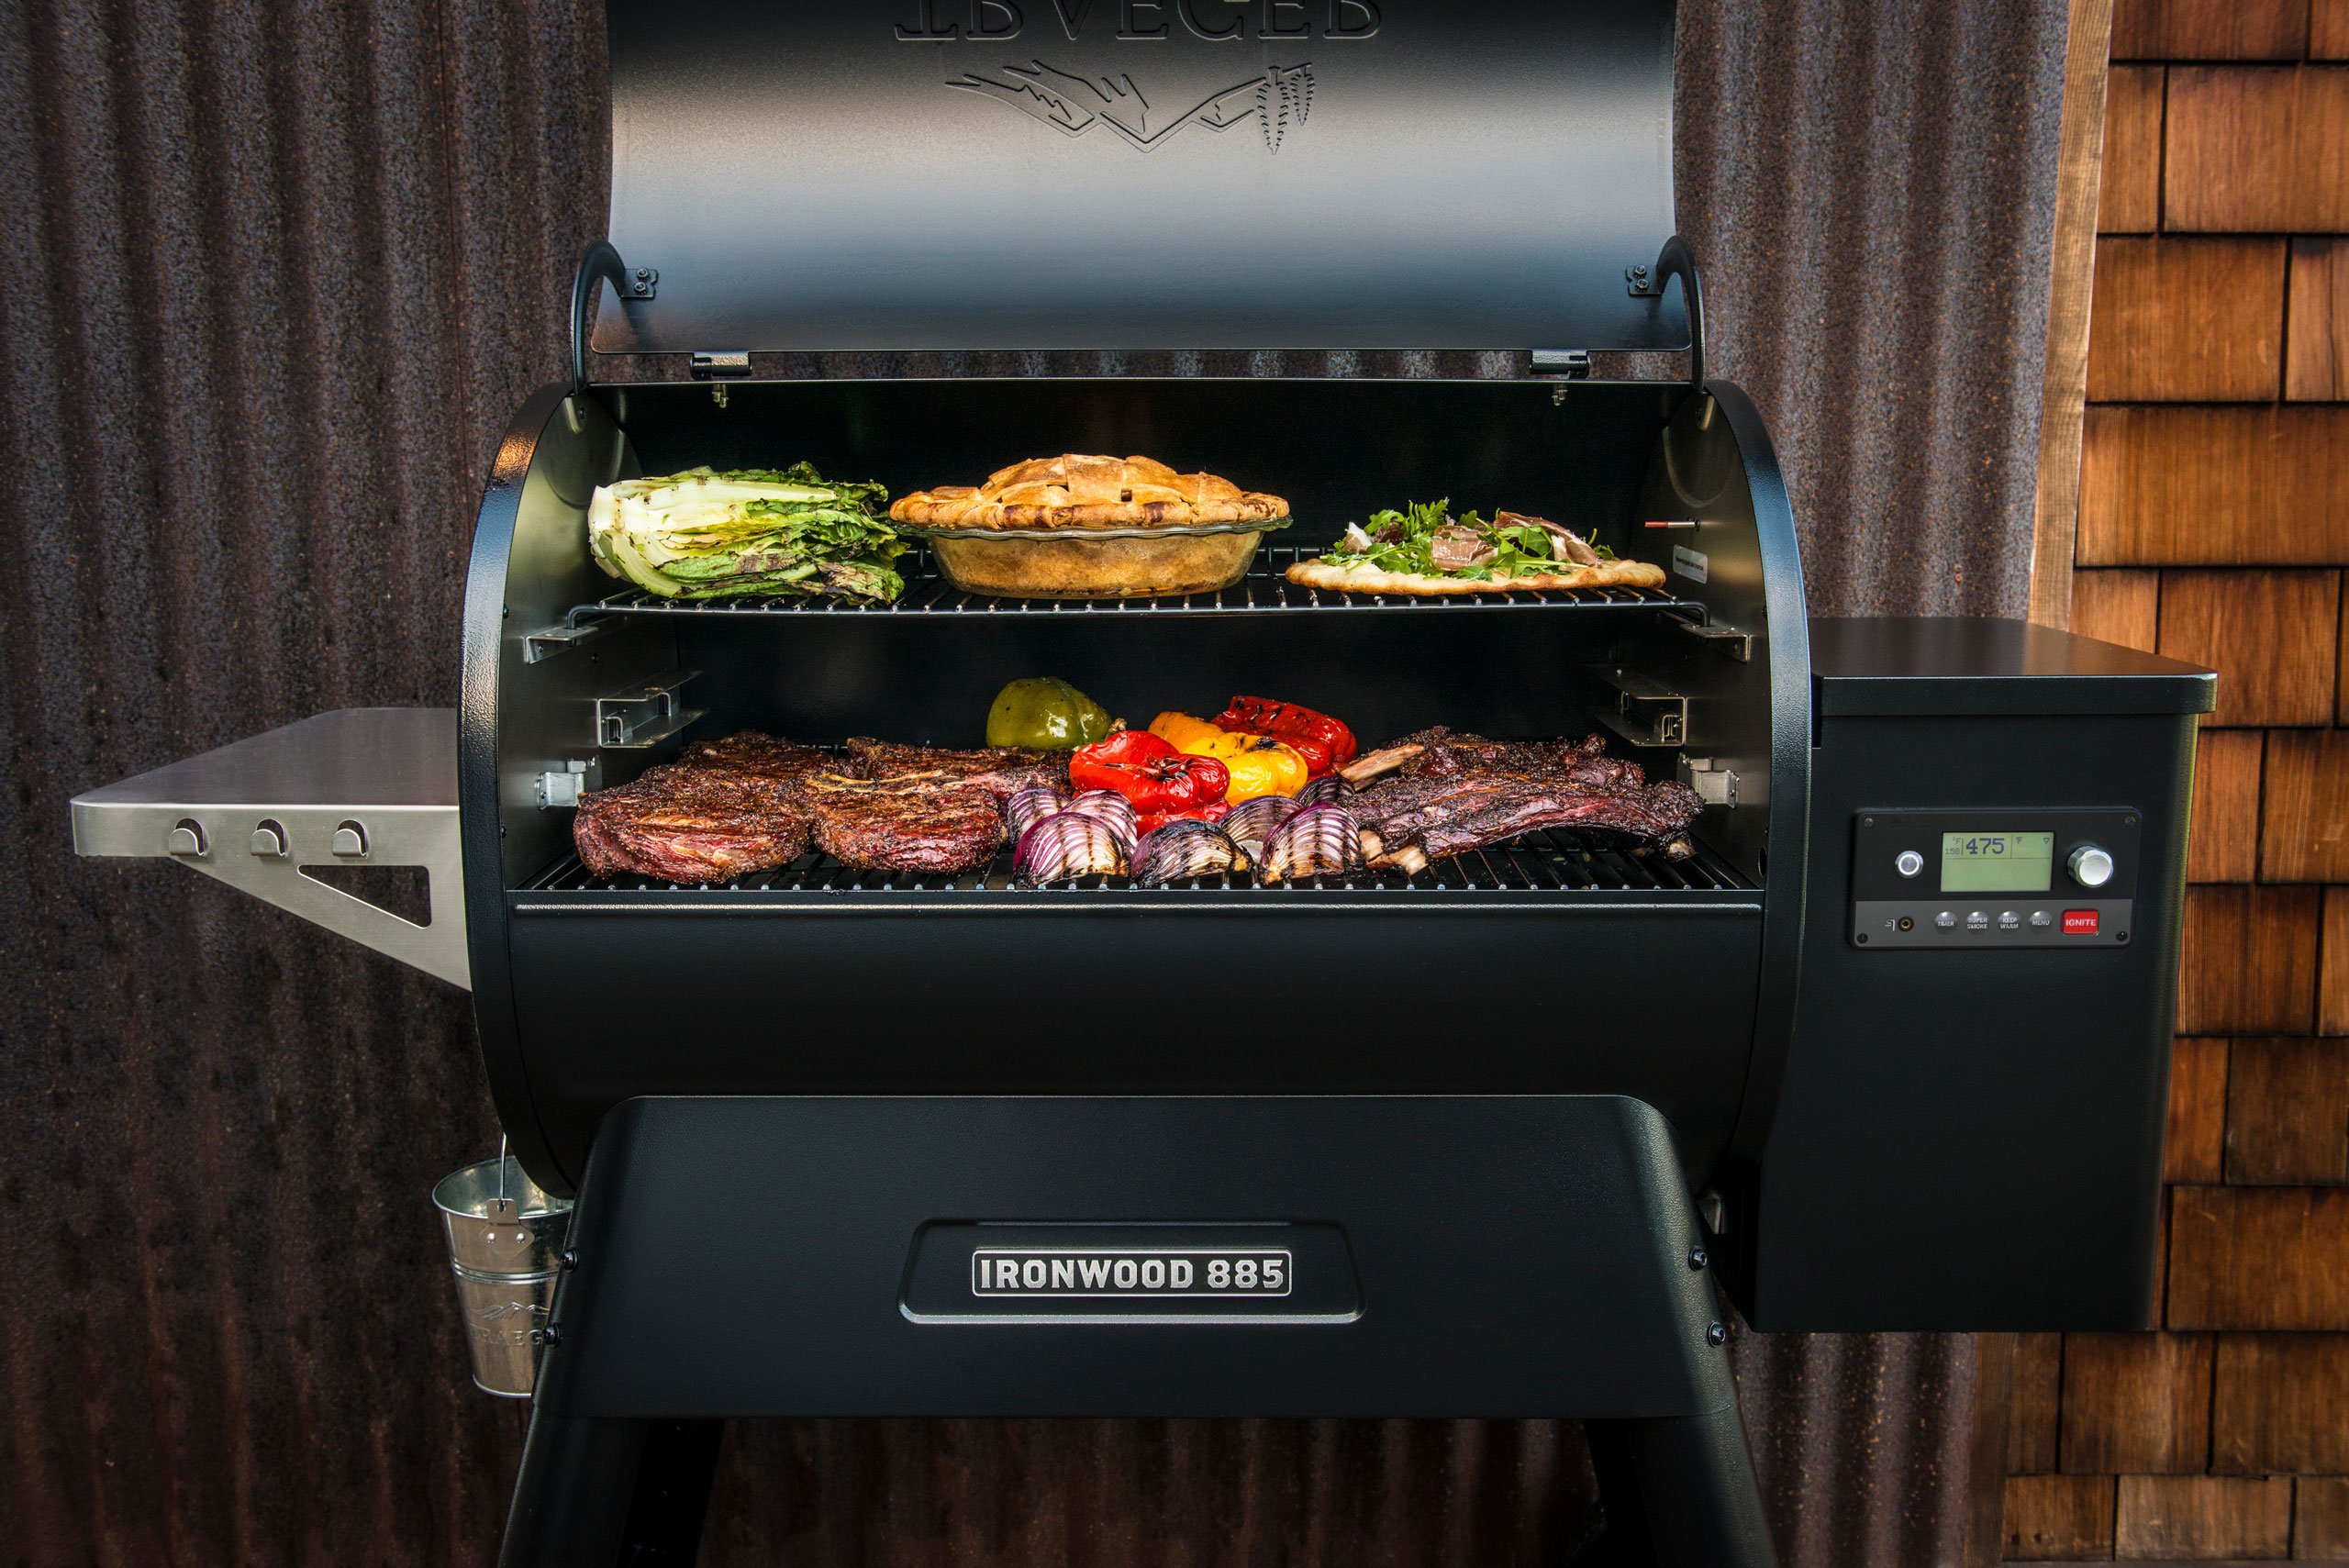 The Traeger Ironwood Series 885 Pellet Grill Is The Ultimate BBQ Setup